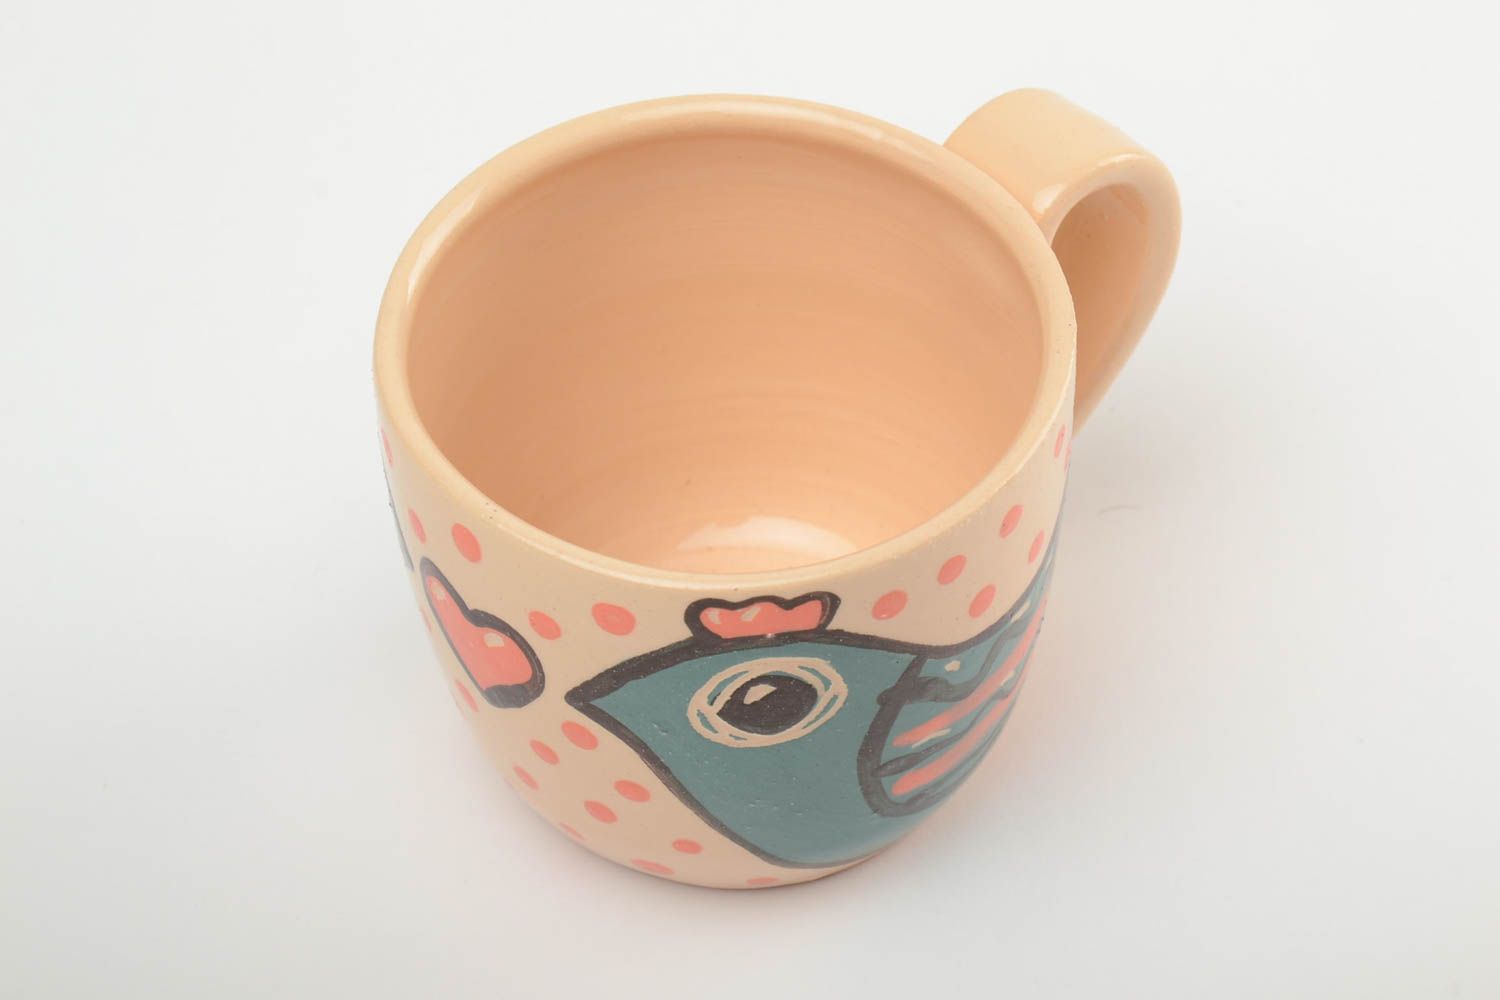 10 oz ceramic cup for kids with bird pattern photo 2